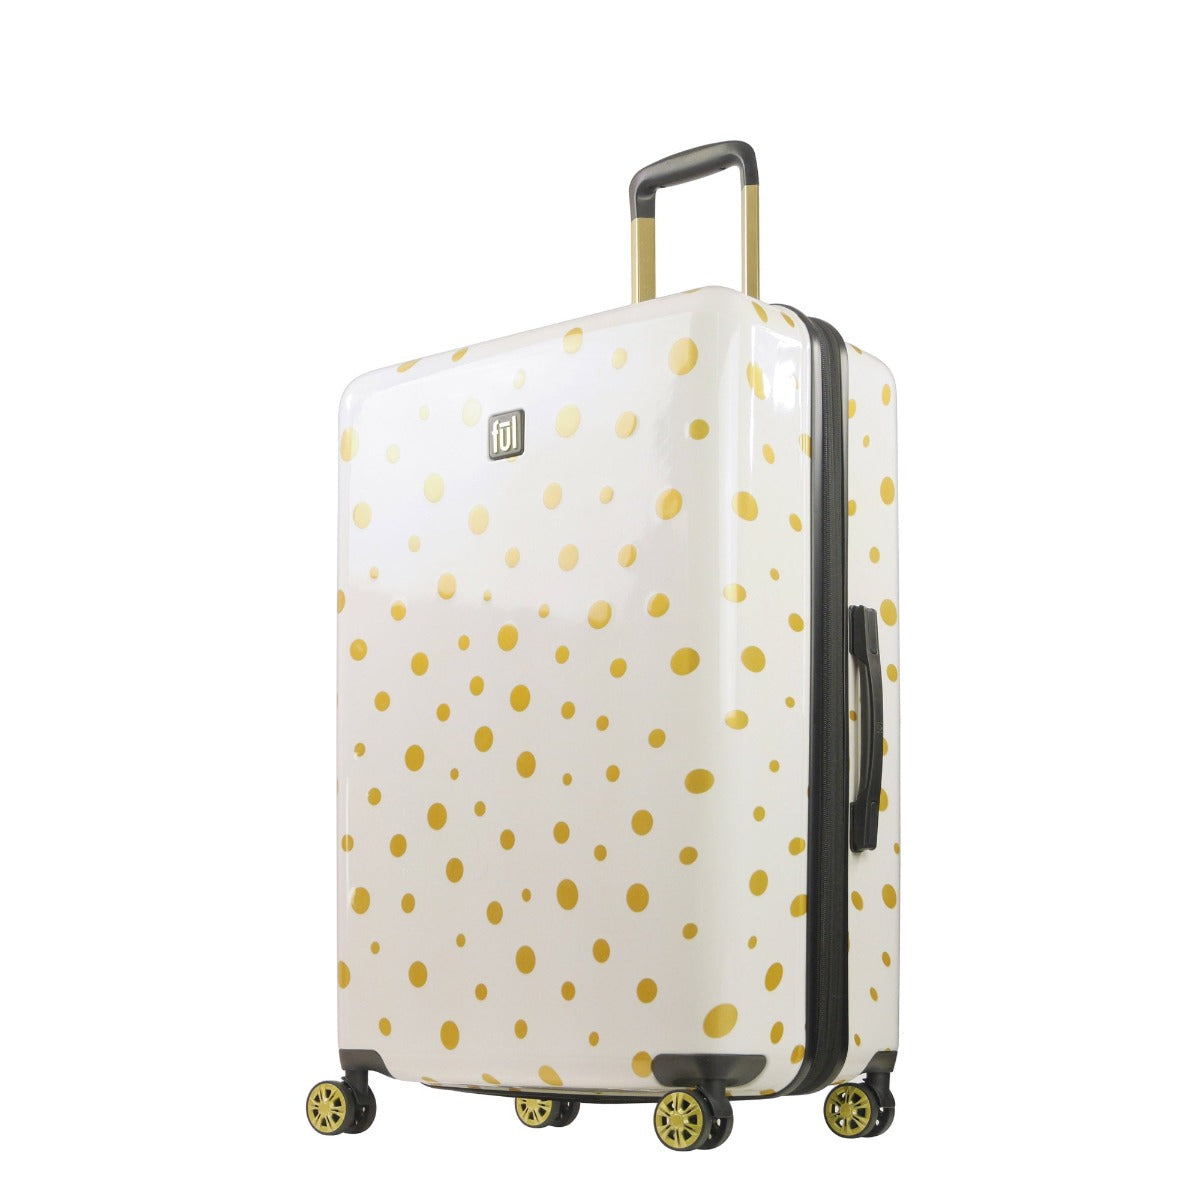 Ful Impulse Mixed Dots Hardside Spinner 31" Checked Luggage White Gold Suitcase